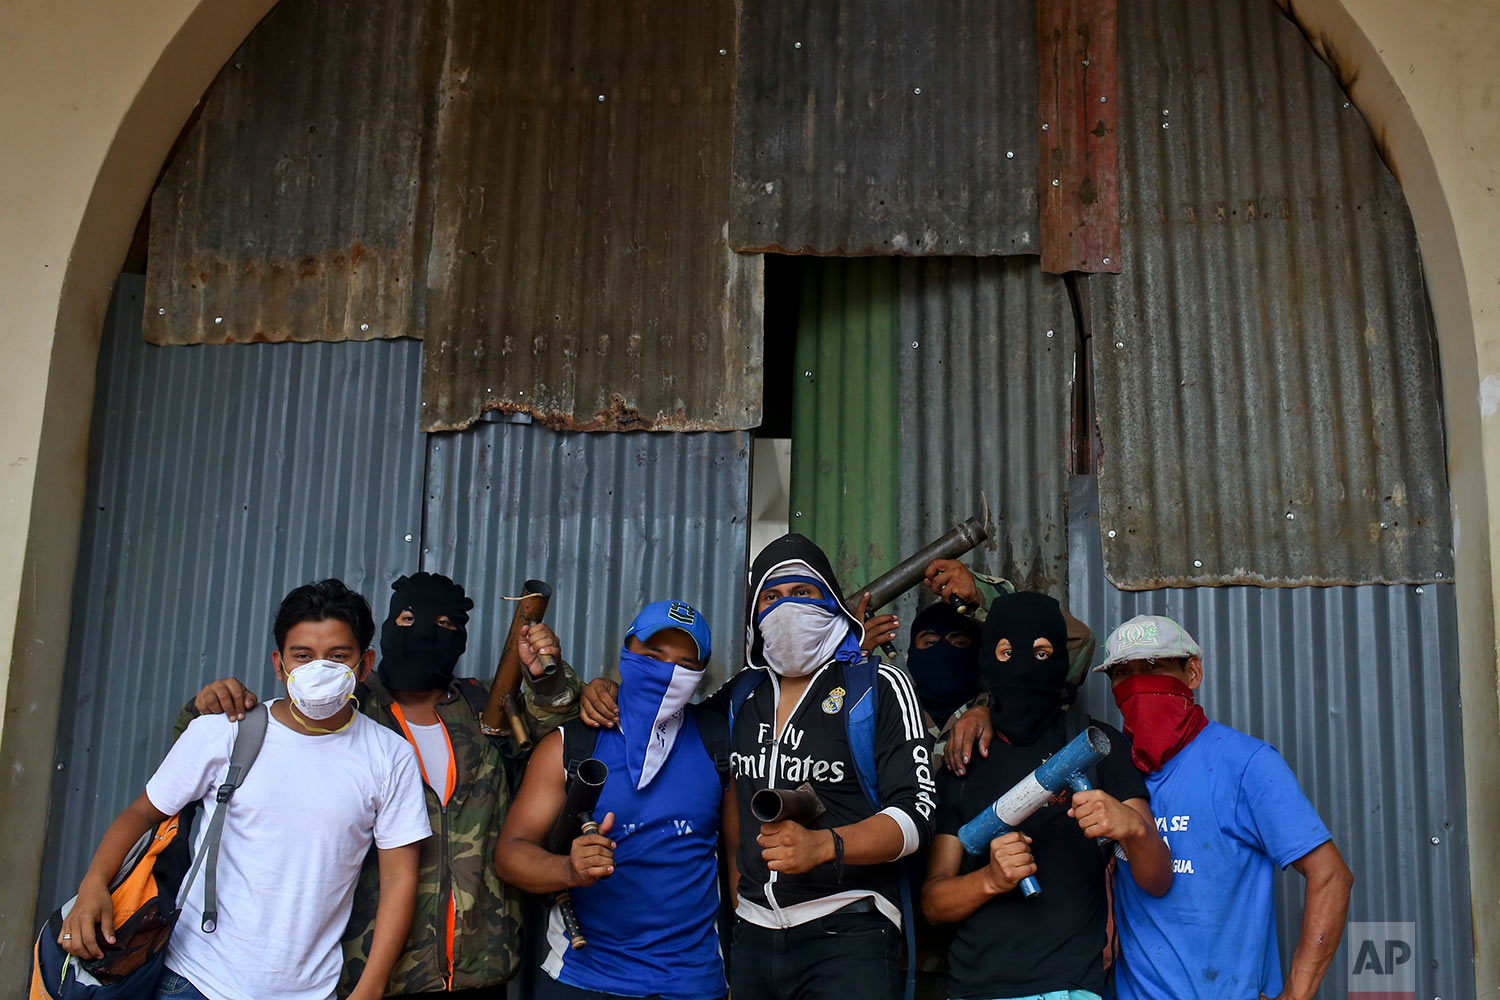  In this May 28, 2018 photo, masked protesters pose for a group photo holding their homemade mortars, outside a shopping center with a store covered by metal sheeting to protect it from looting, in Masaya, Nicaragua. (AP Photo/Esteban Felix) 